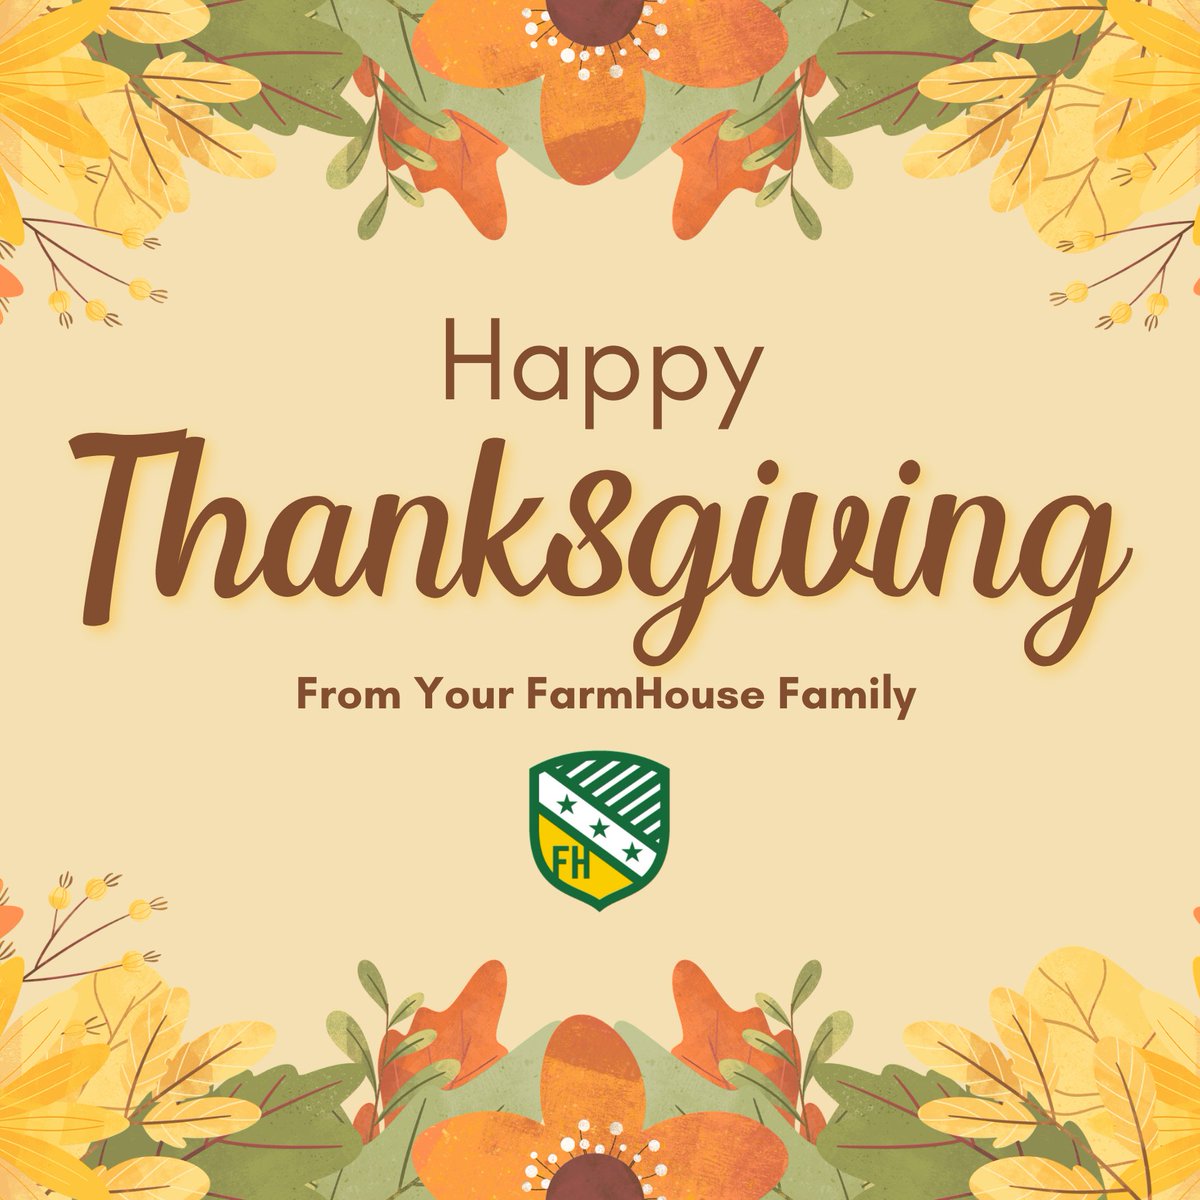 Happy Thanksgiving to all our FH members, friends and family! We hope this season brings you moments of joy, gratitude and togetherness with your friends and loved ones.